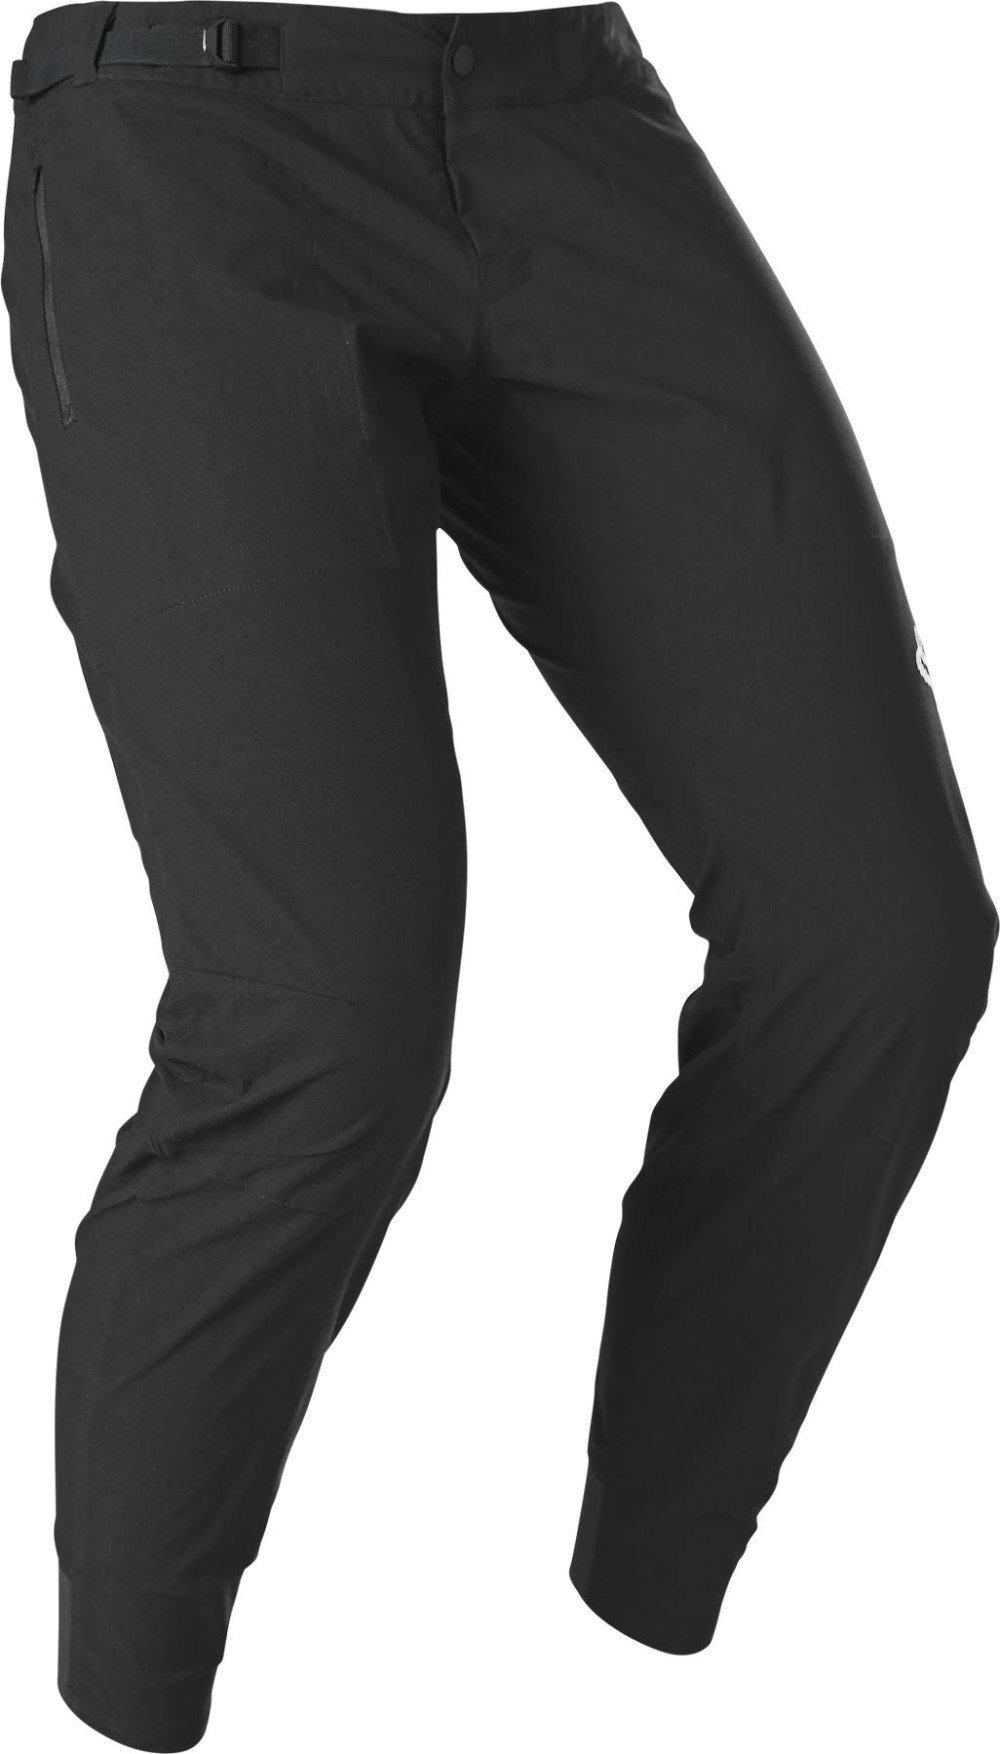 Ranger MTB Cycling Trousers image 0